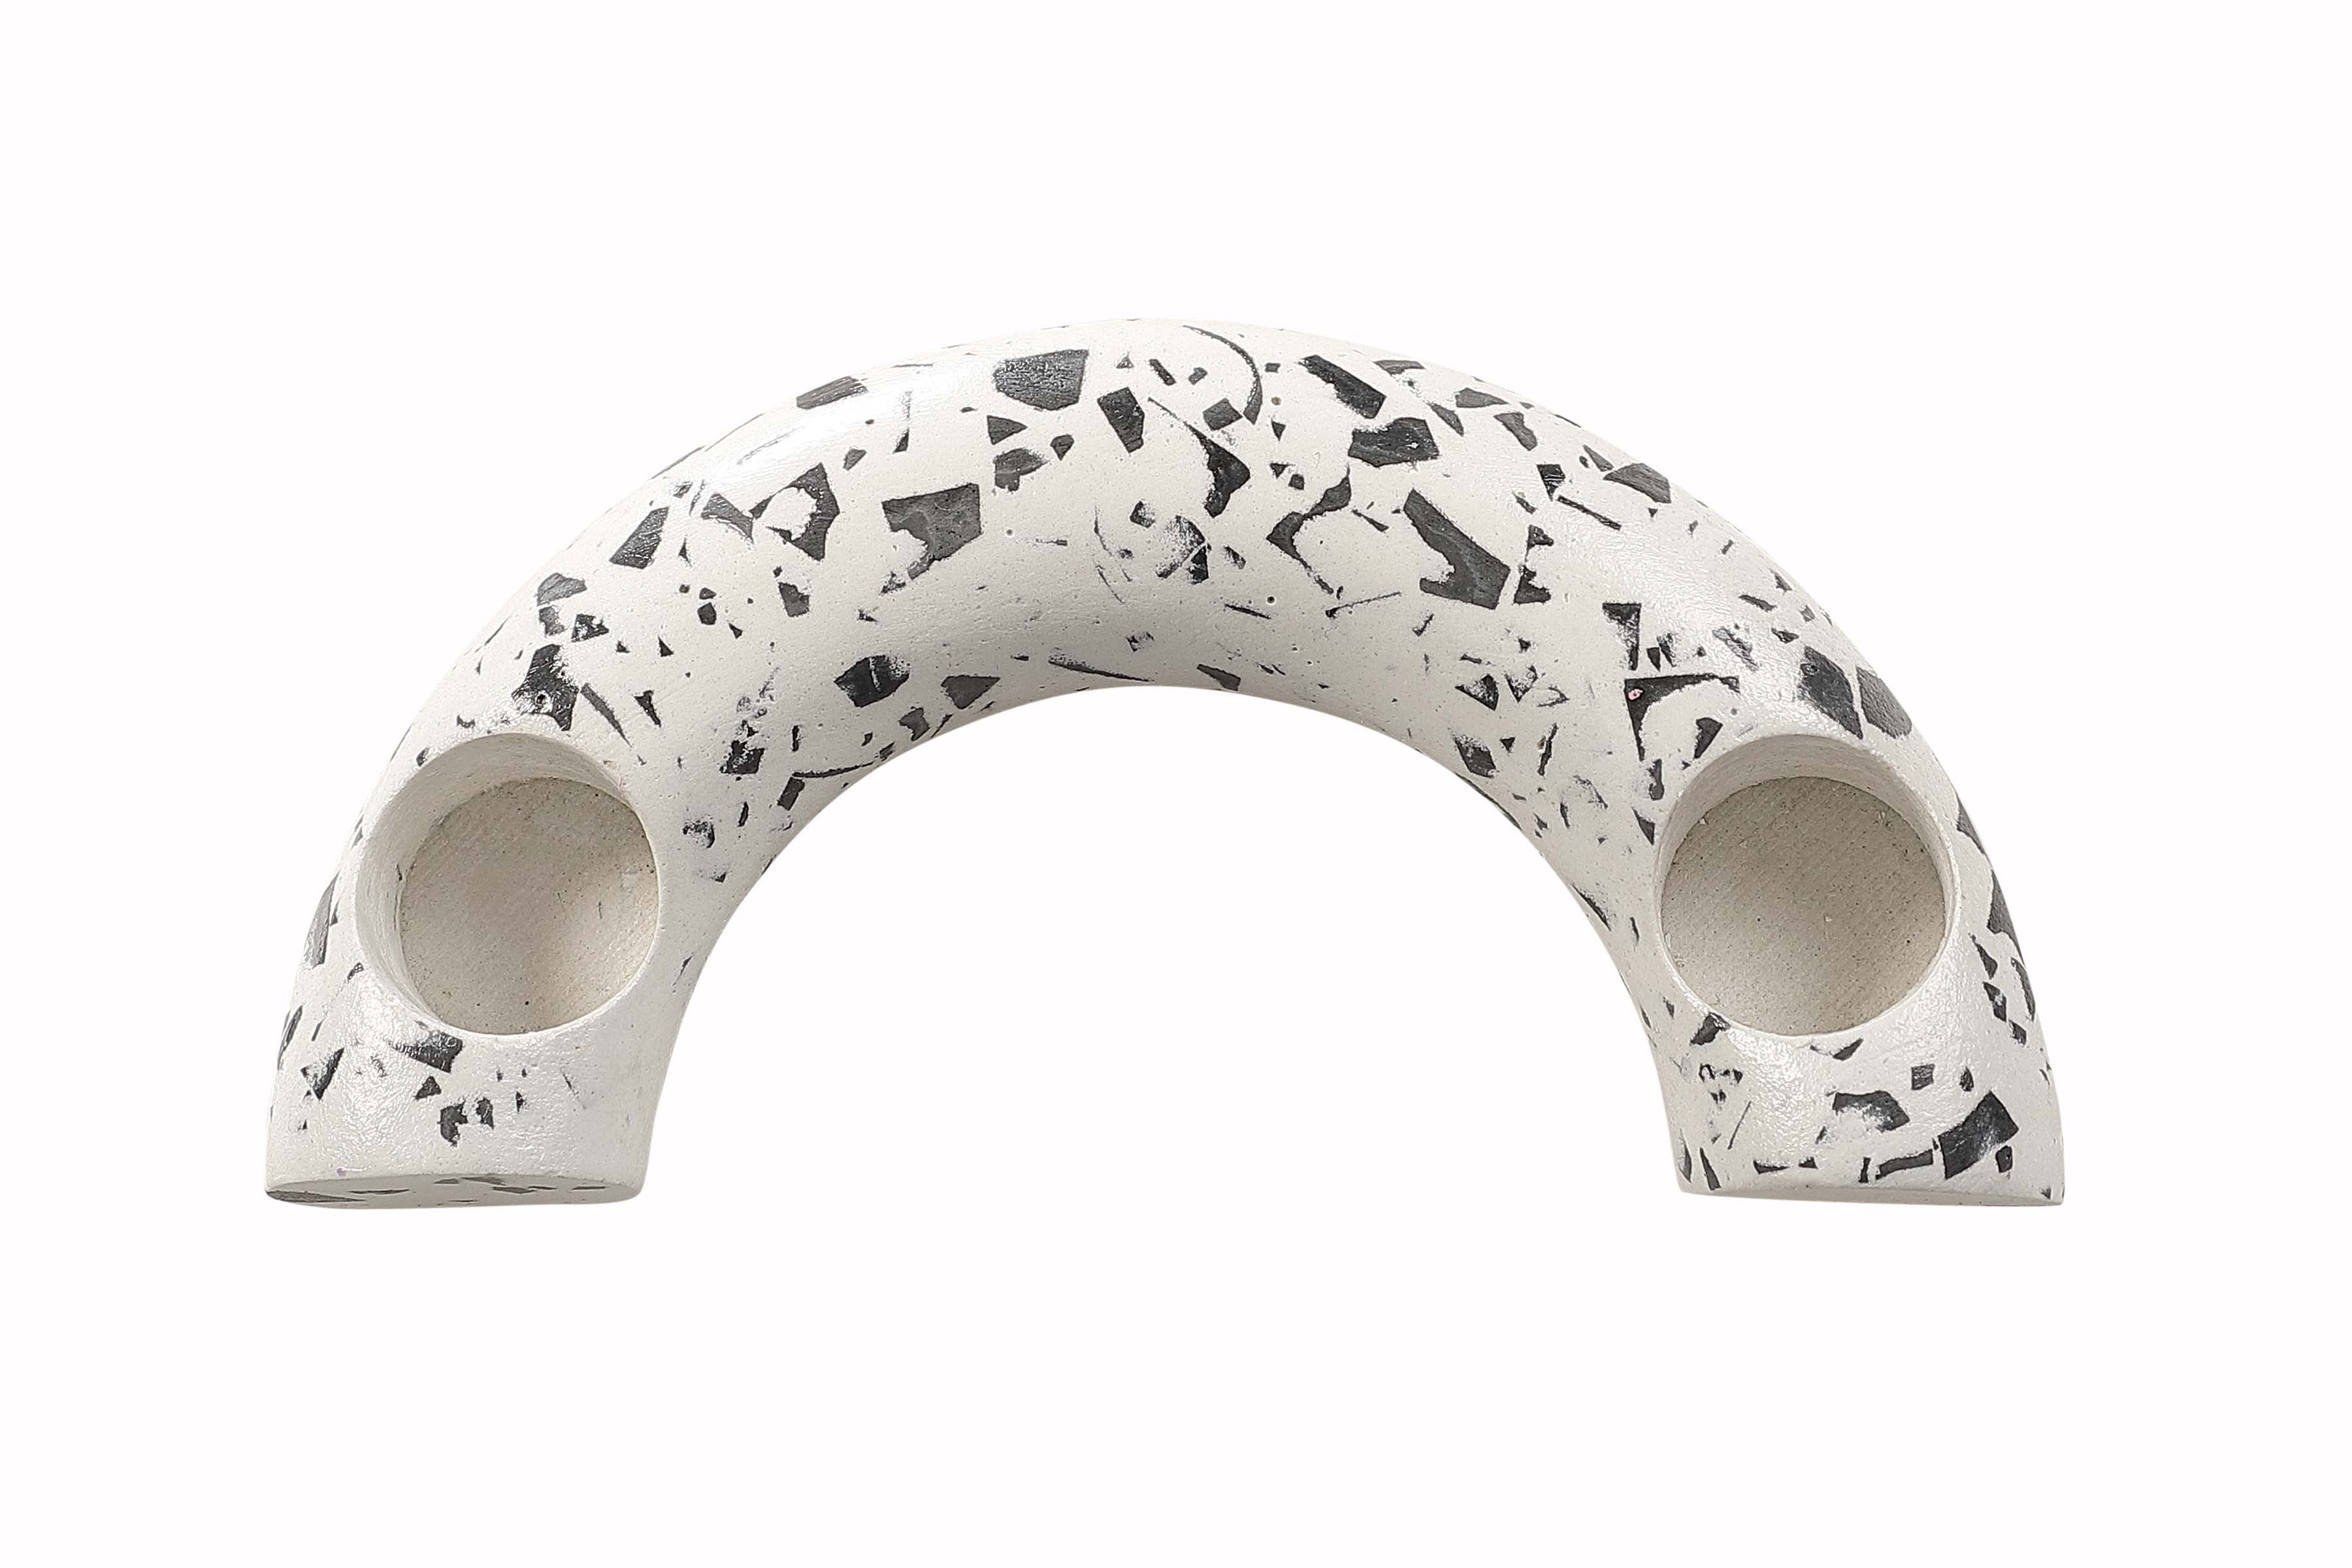 Terrazzo C Shaped Concrete Candle holder-  Black & White 5.5x3 Inch (Set of 2)